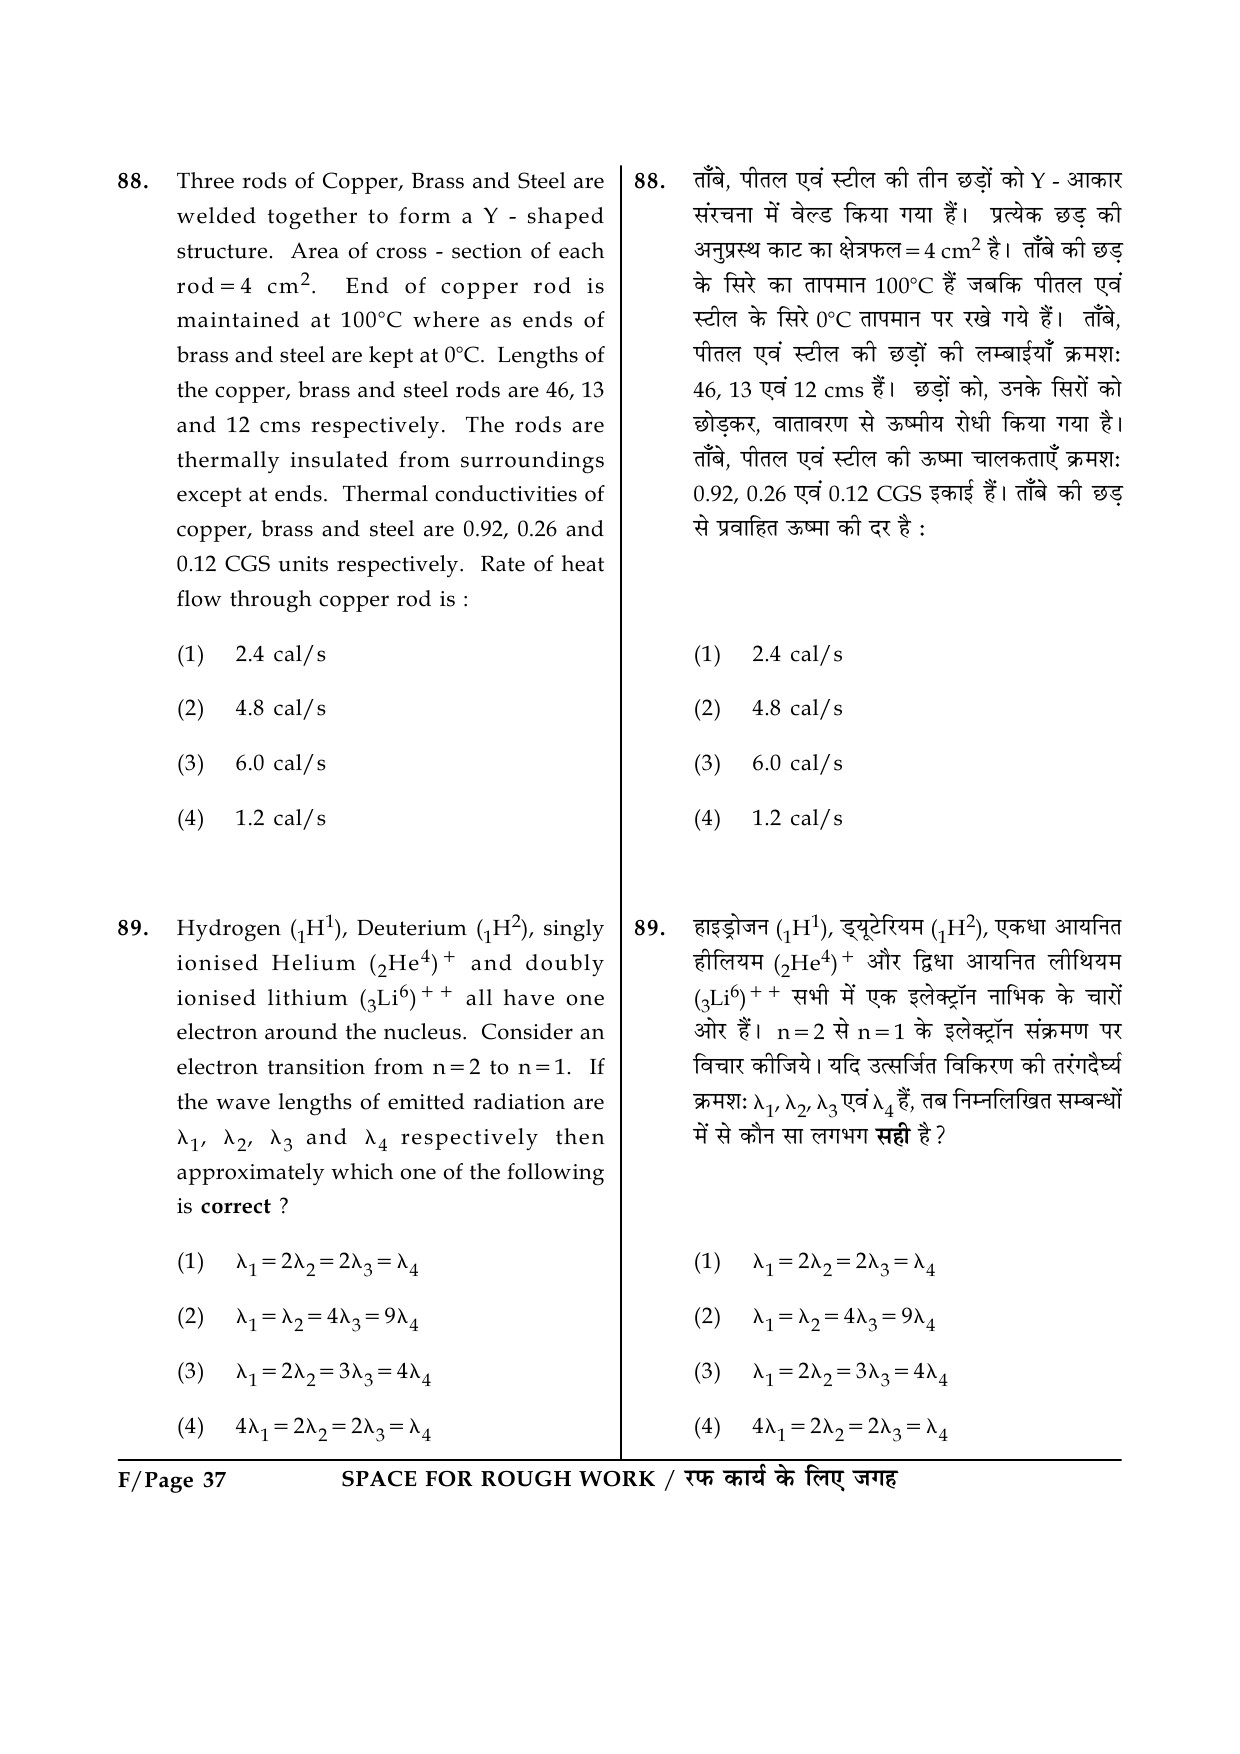 JEE Main Exam Question Paper 2014 Booklet F 37